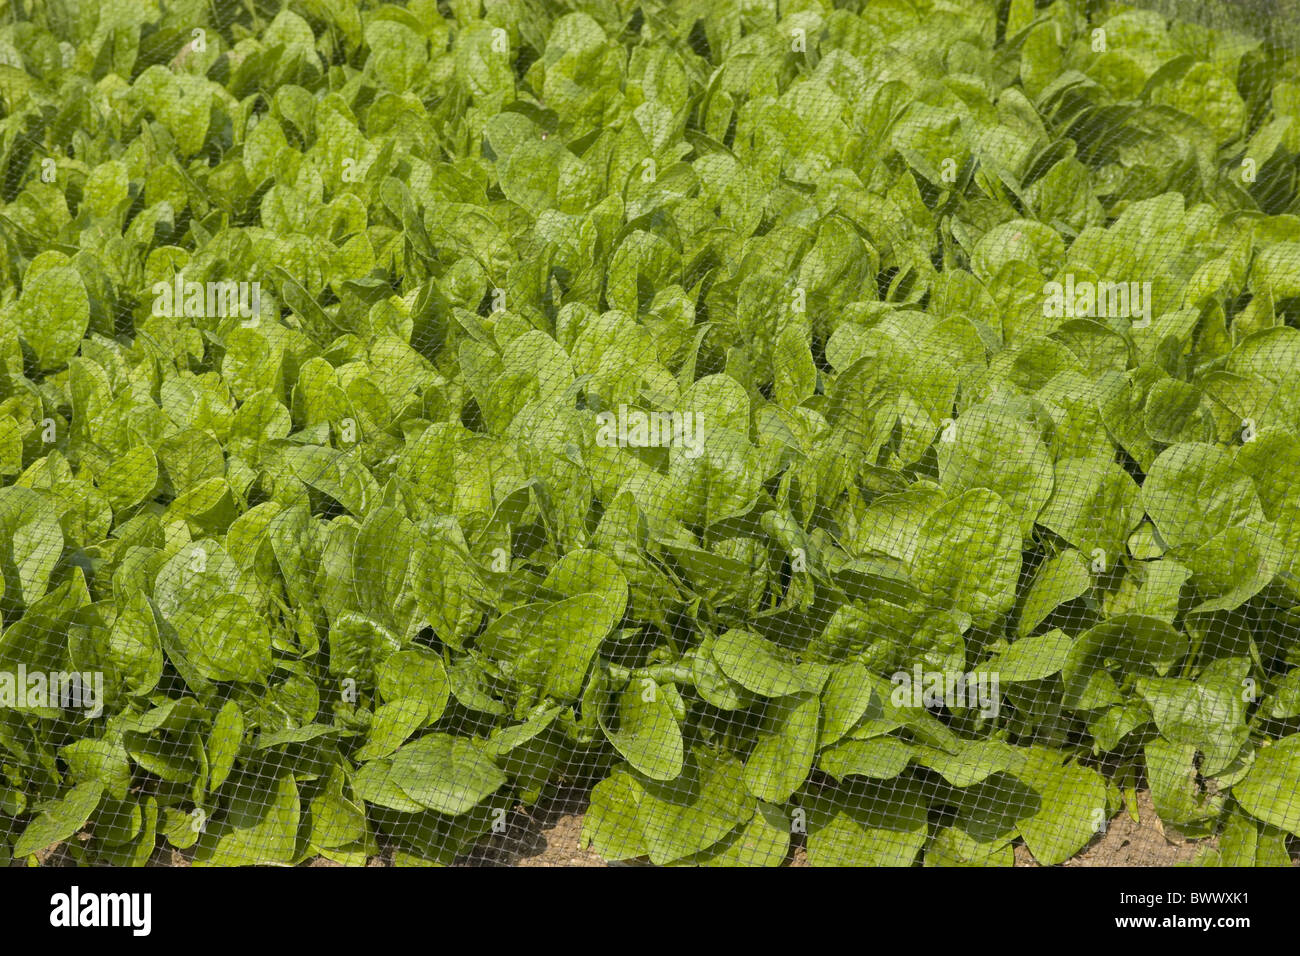 Agriculture Agricultures Agricltural Close up Net Nets Netting Spinach Spinacia oleracea Leaf Leaves Salad Salads Cultivate Stock Photo